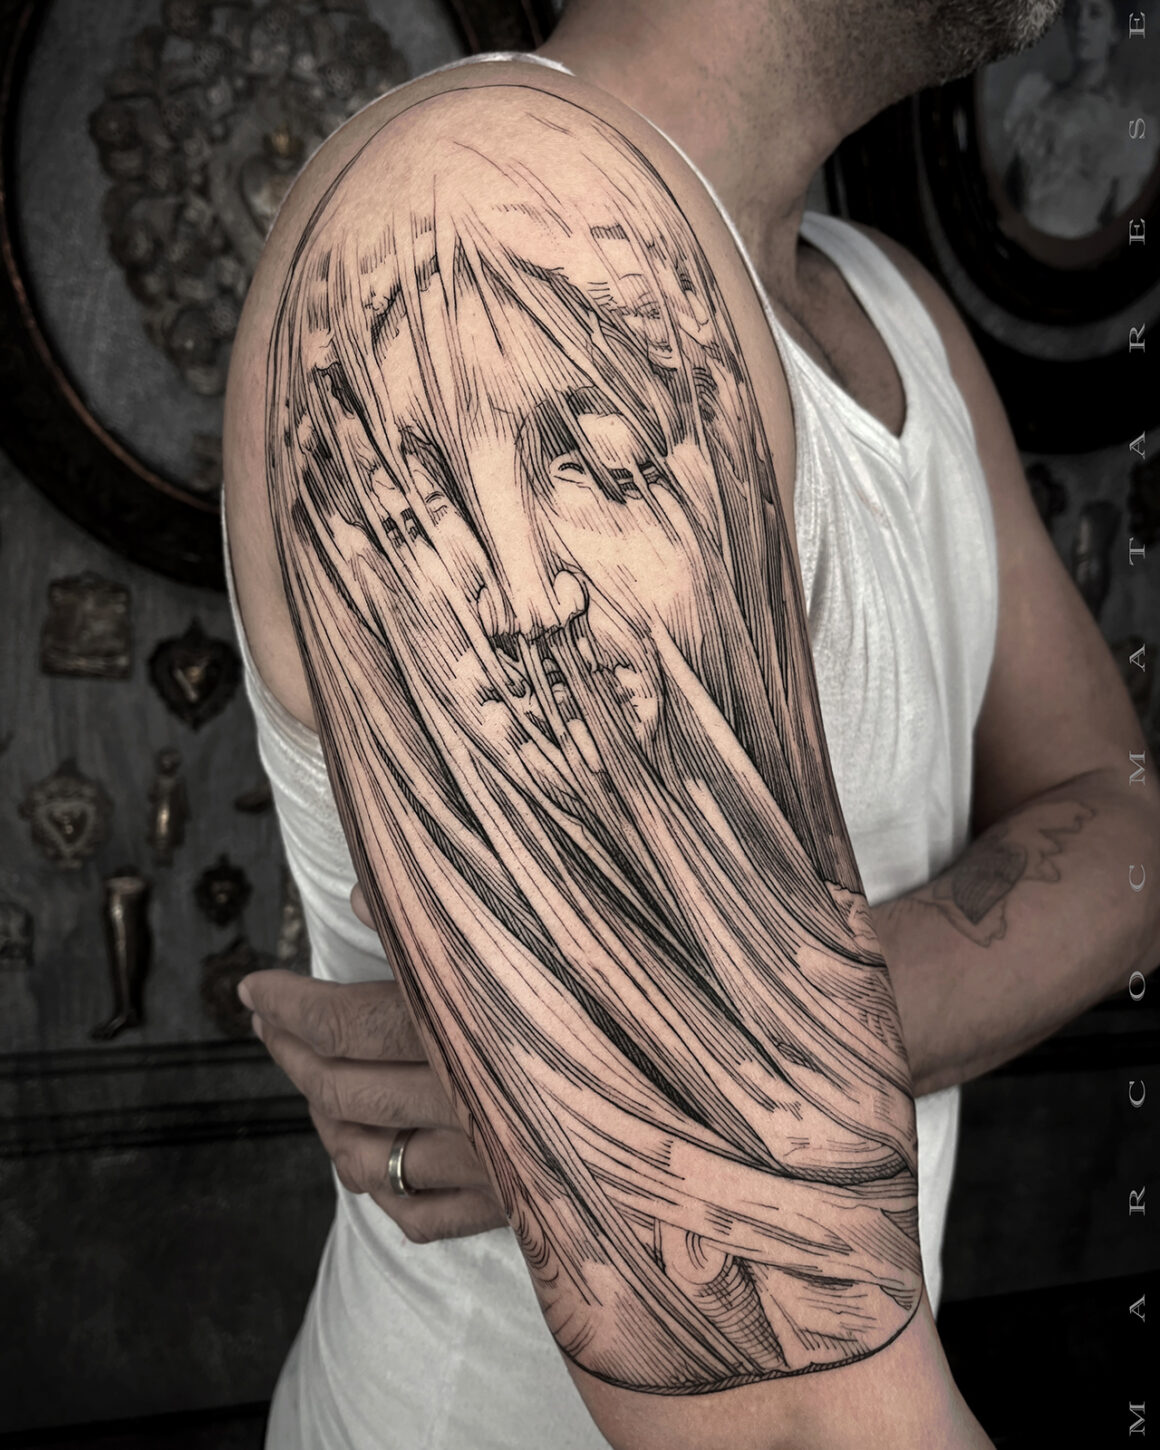 Tattoo by Marco C. Matarese, @marcocmata